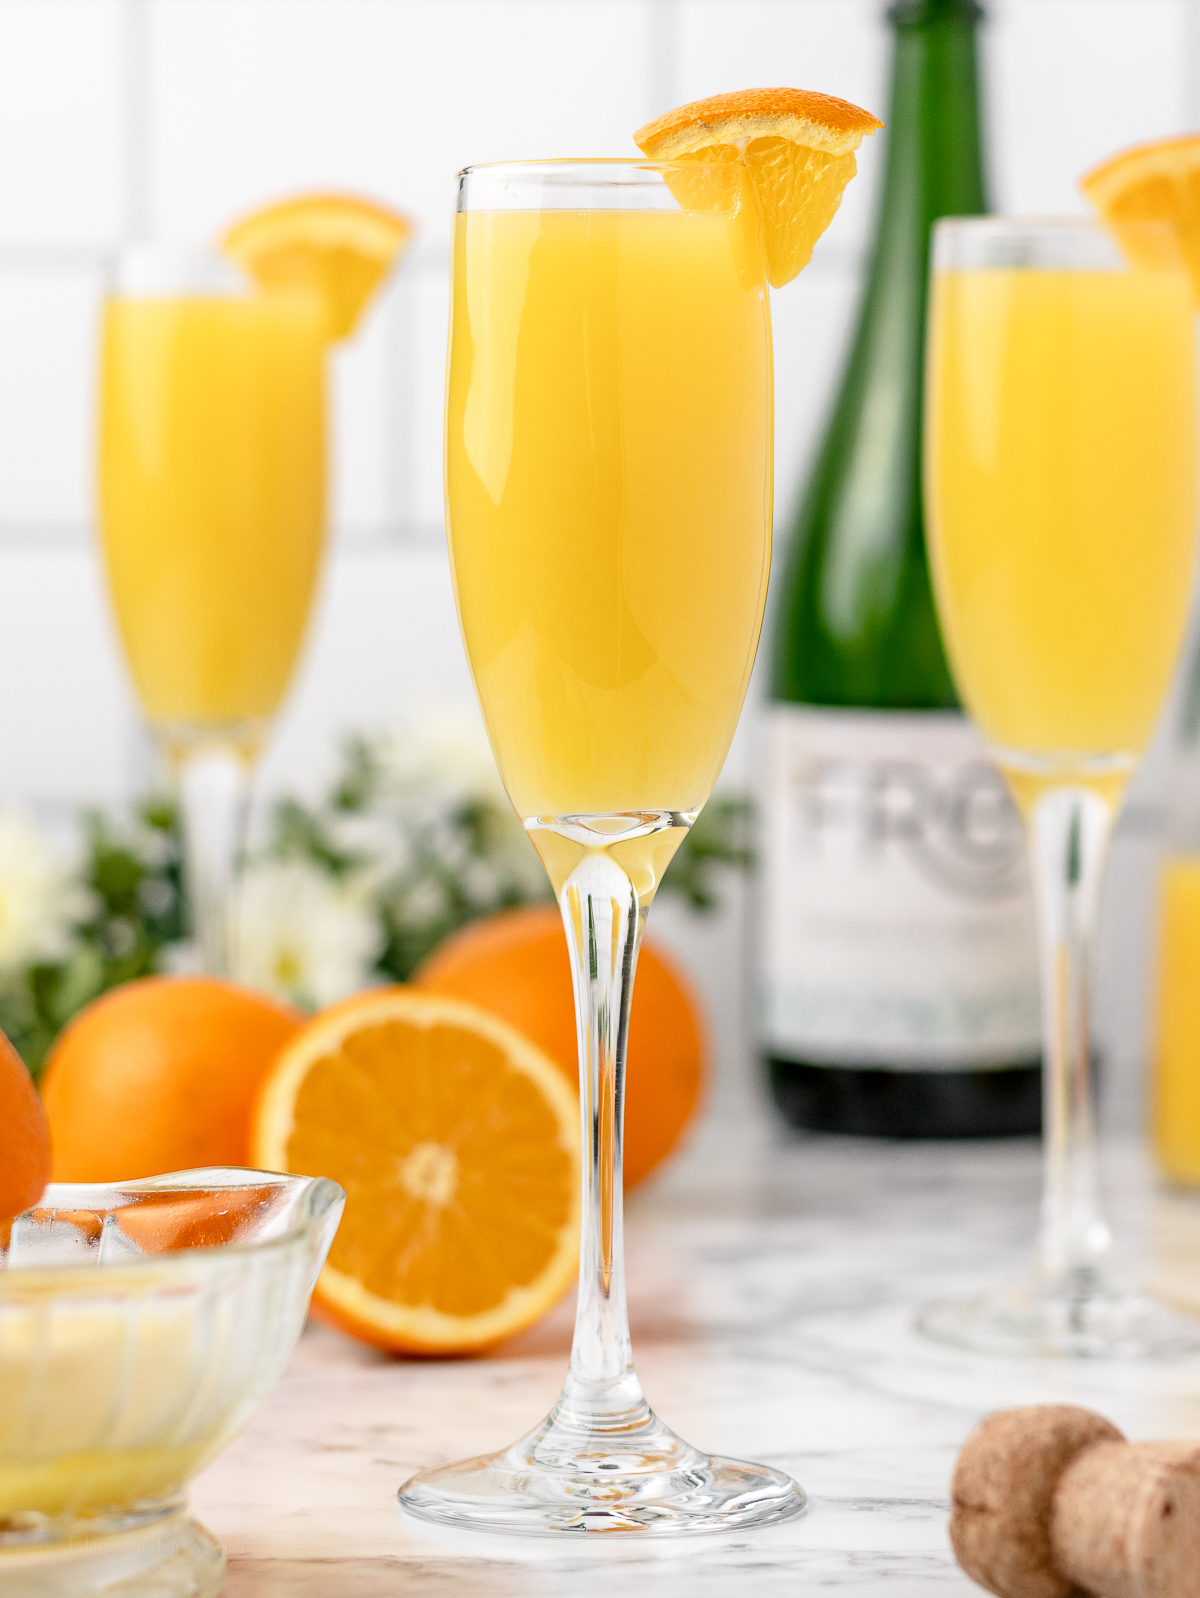 Mimosa Mocktails garnished with orange slice and ready to drink at brunch.